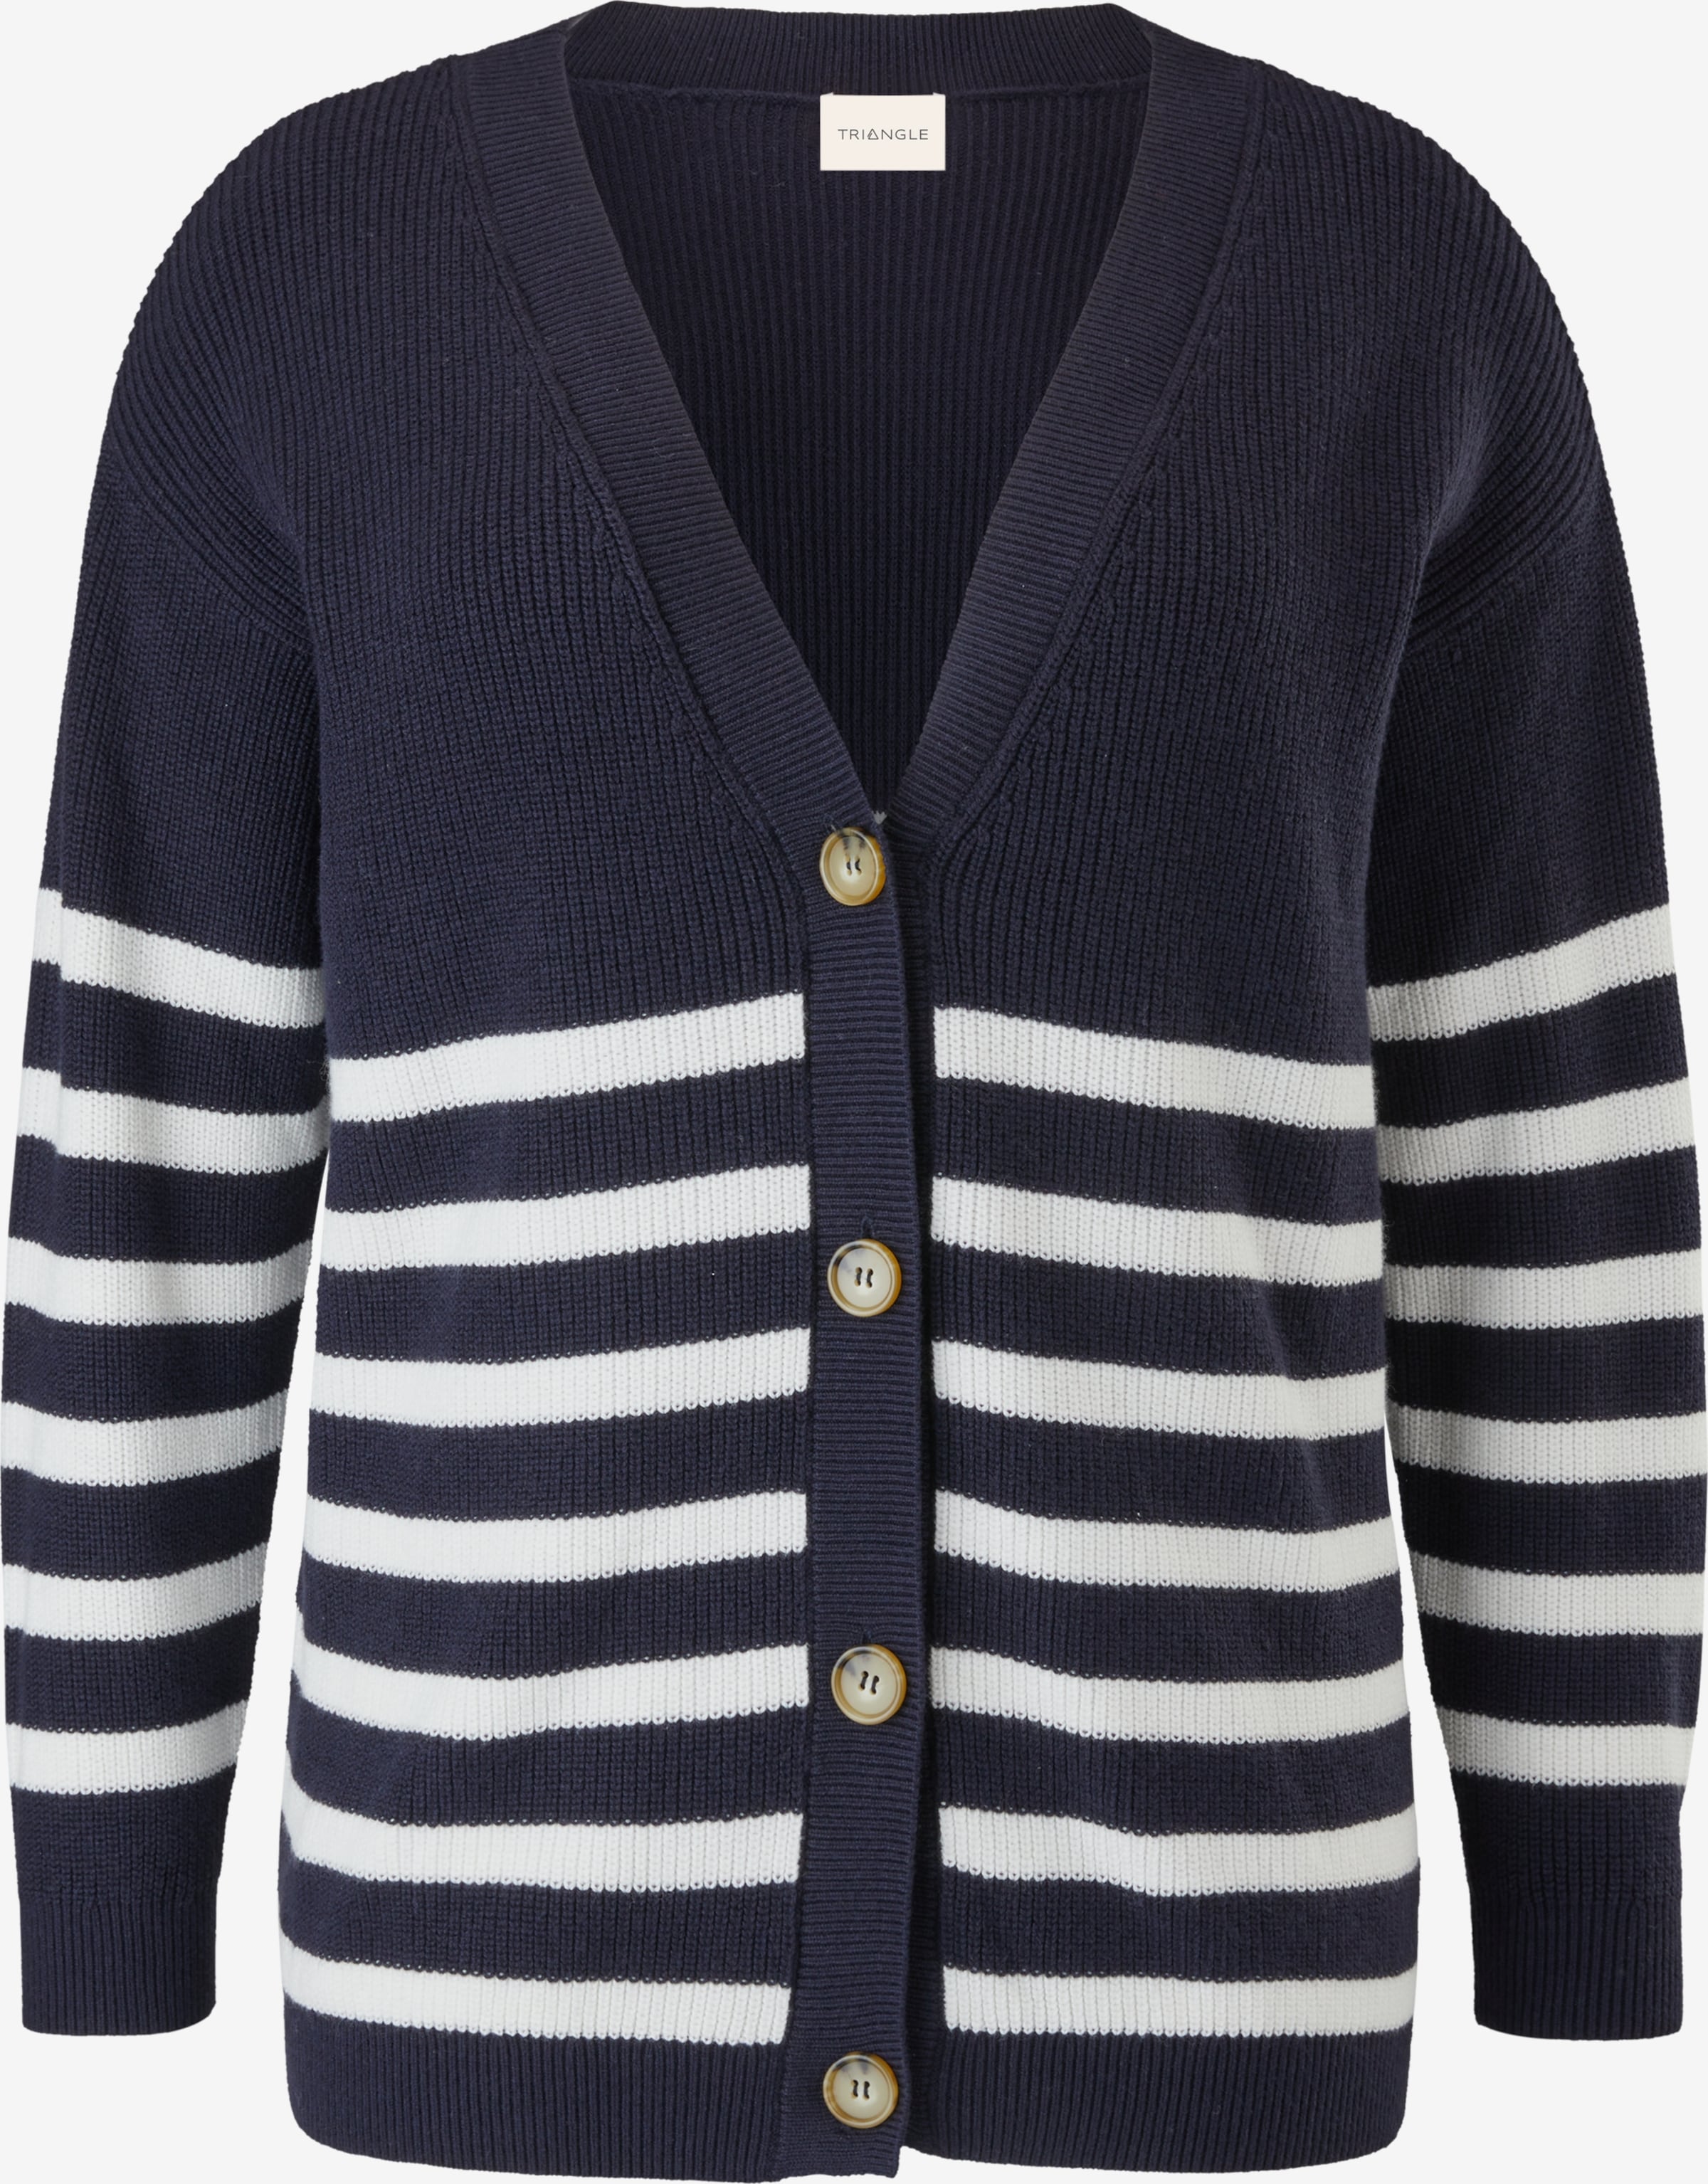 ABOUT Navy | TRIANGLE Strickjacke in YOU